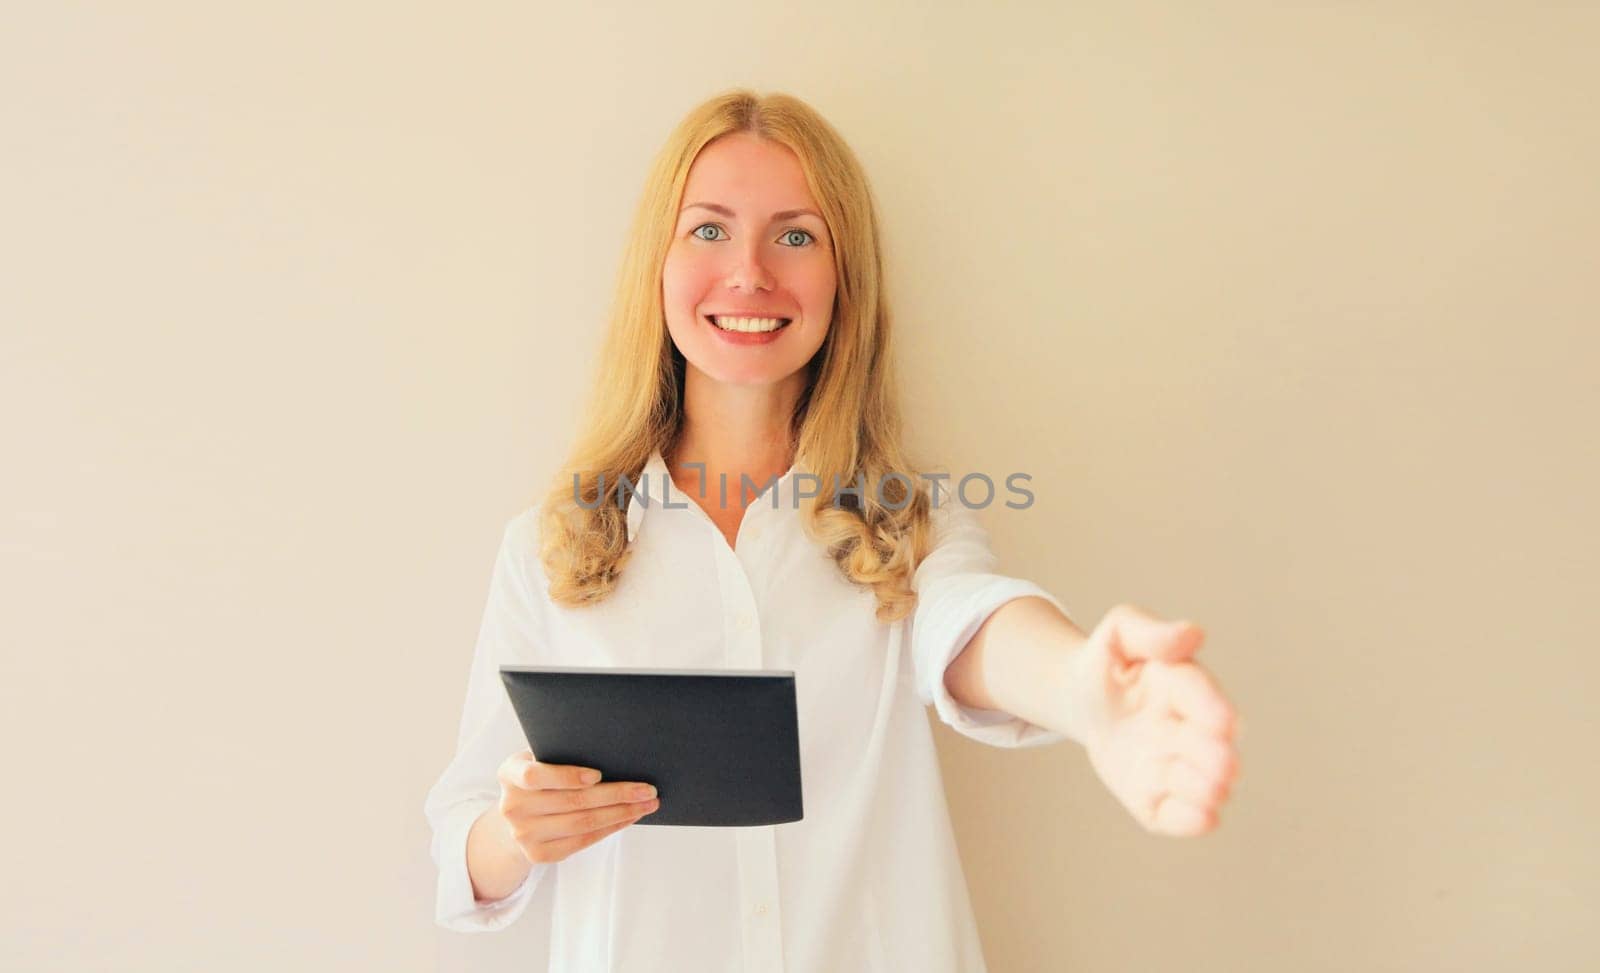 Happy smiling woman employer stretches out her hand for handshake greets applicant holds digital tablet computer in office